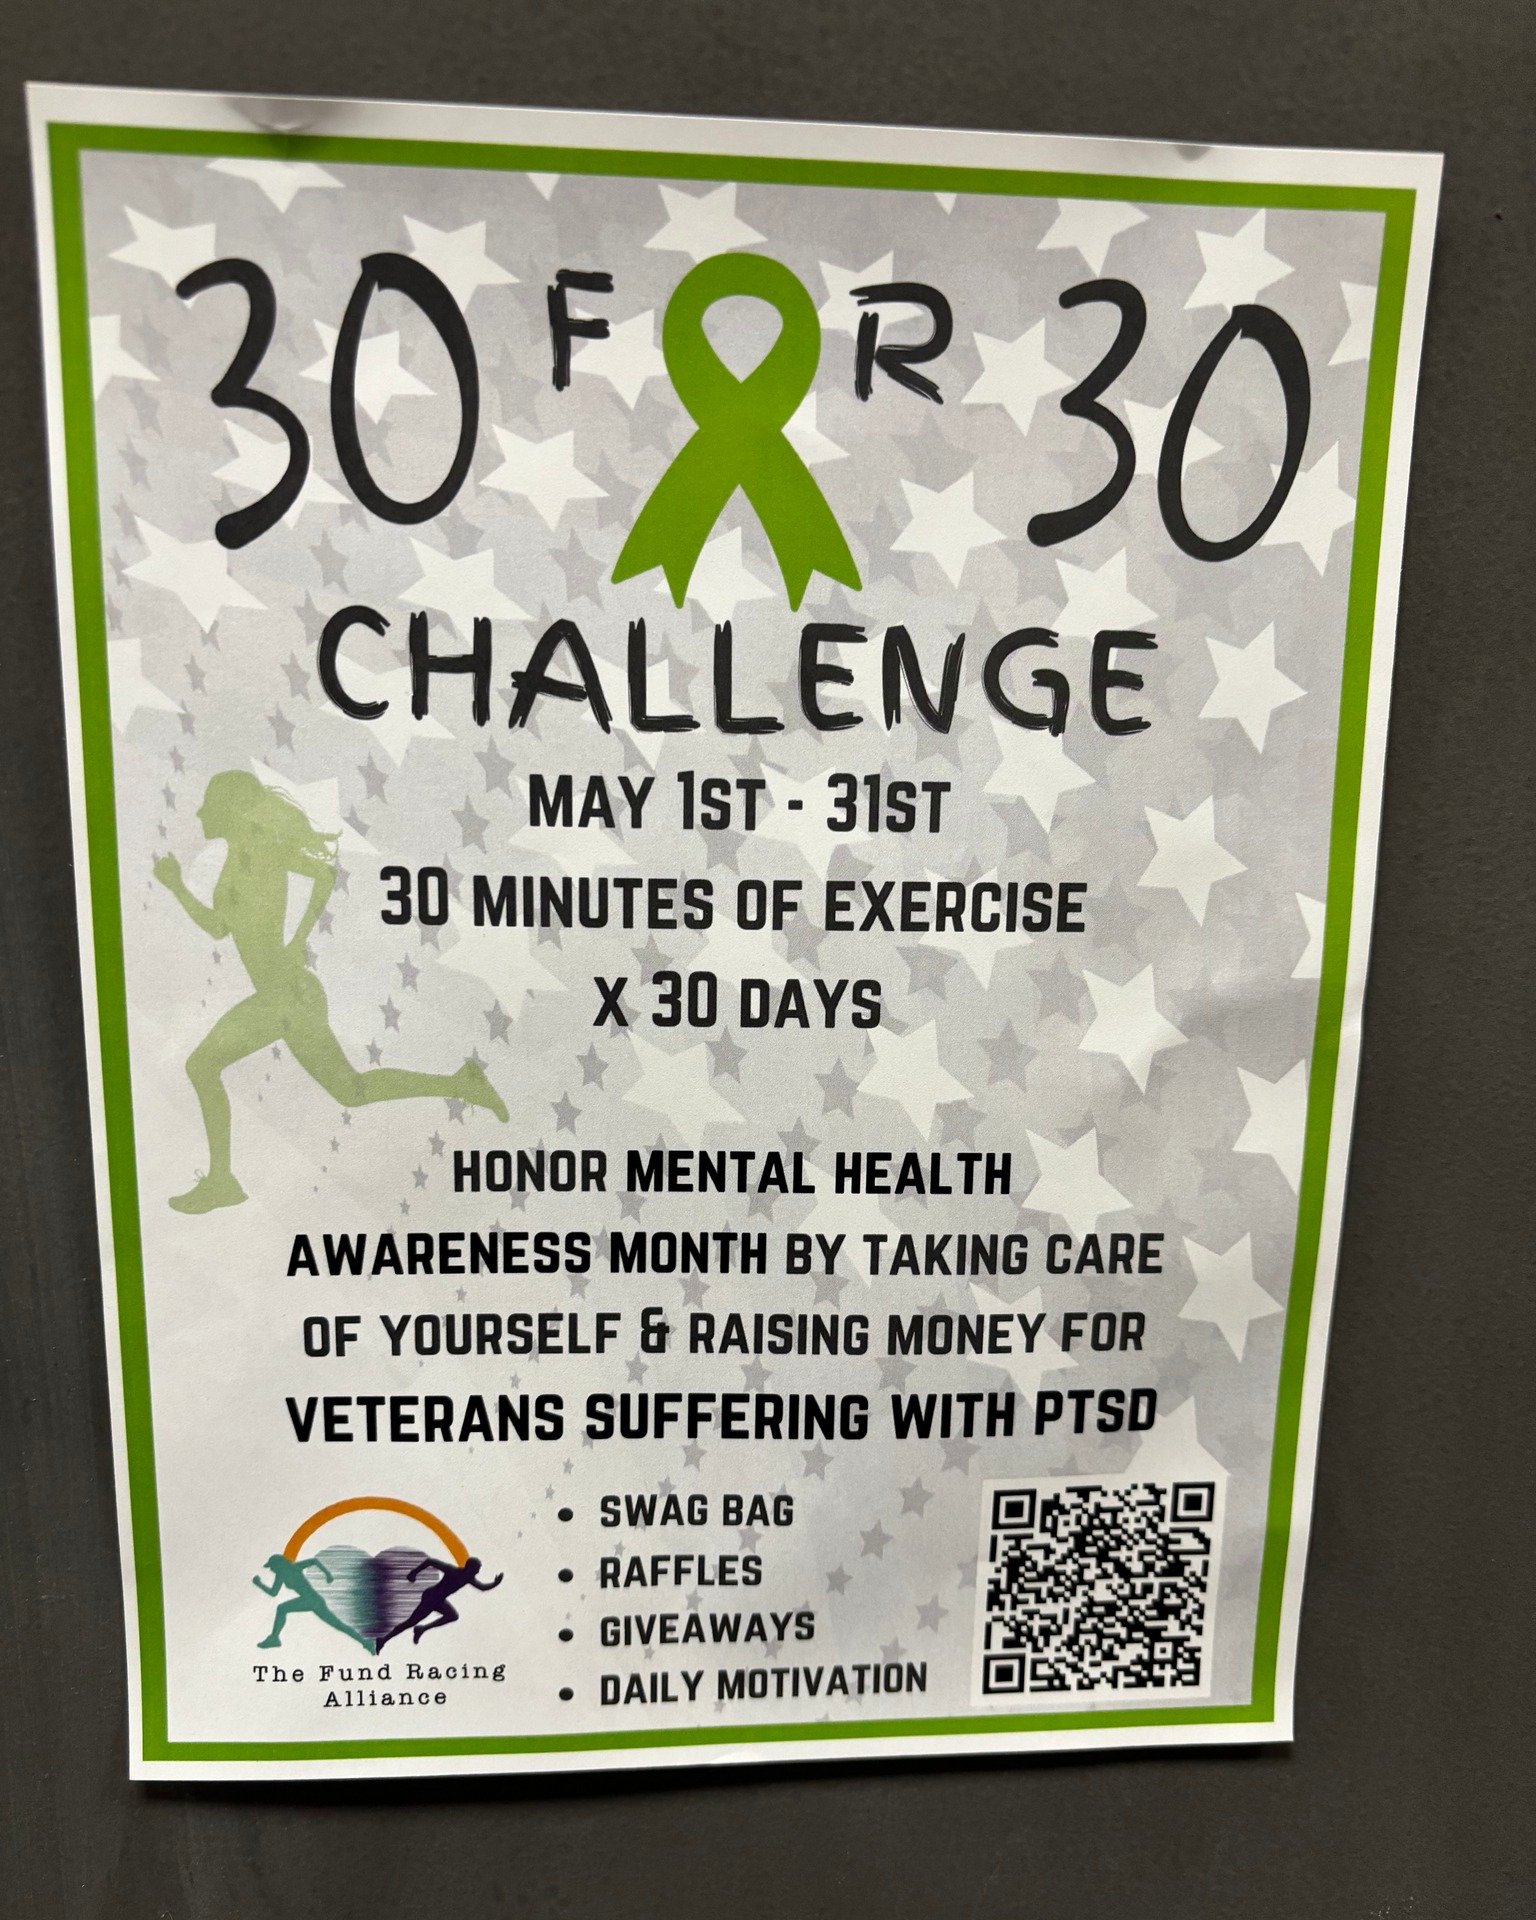 ✨Community event✨

🗣 May is mental health awareness month and we are proud to post about this event from @thefundracingalliance The Fund Racing Alliance 🏃

🏃&zwj;♀️Check out their pages for more information or scan the QR code when you are in our 